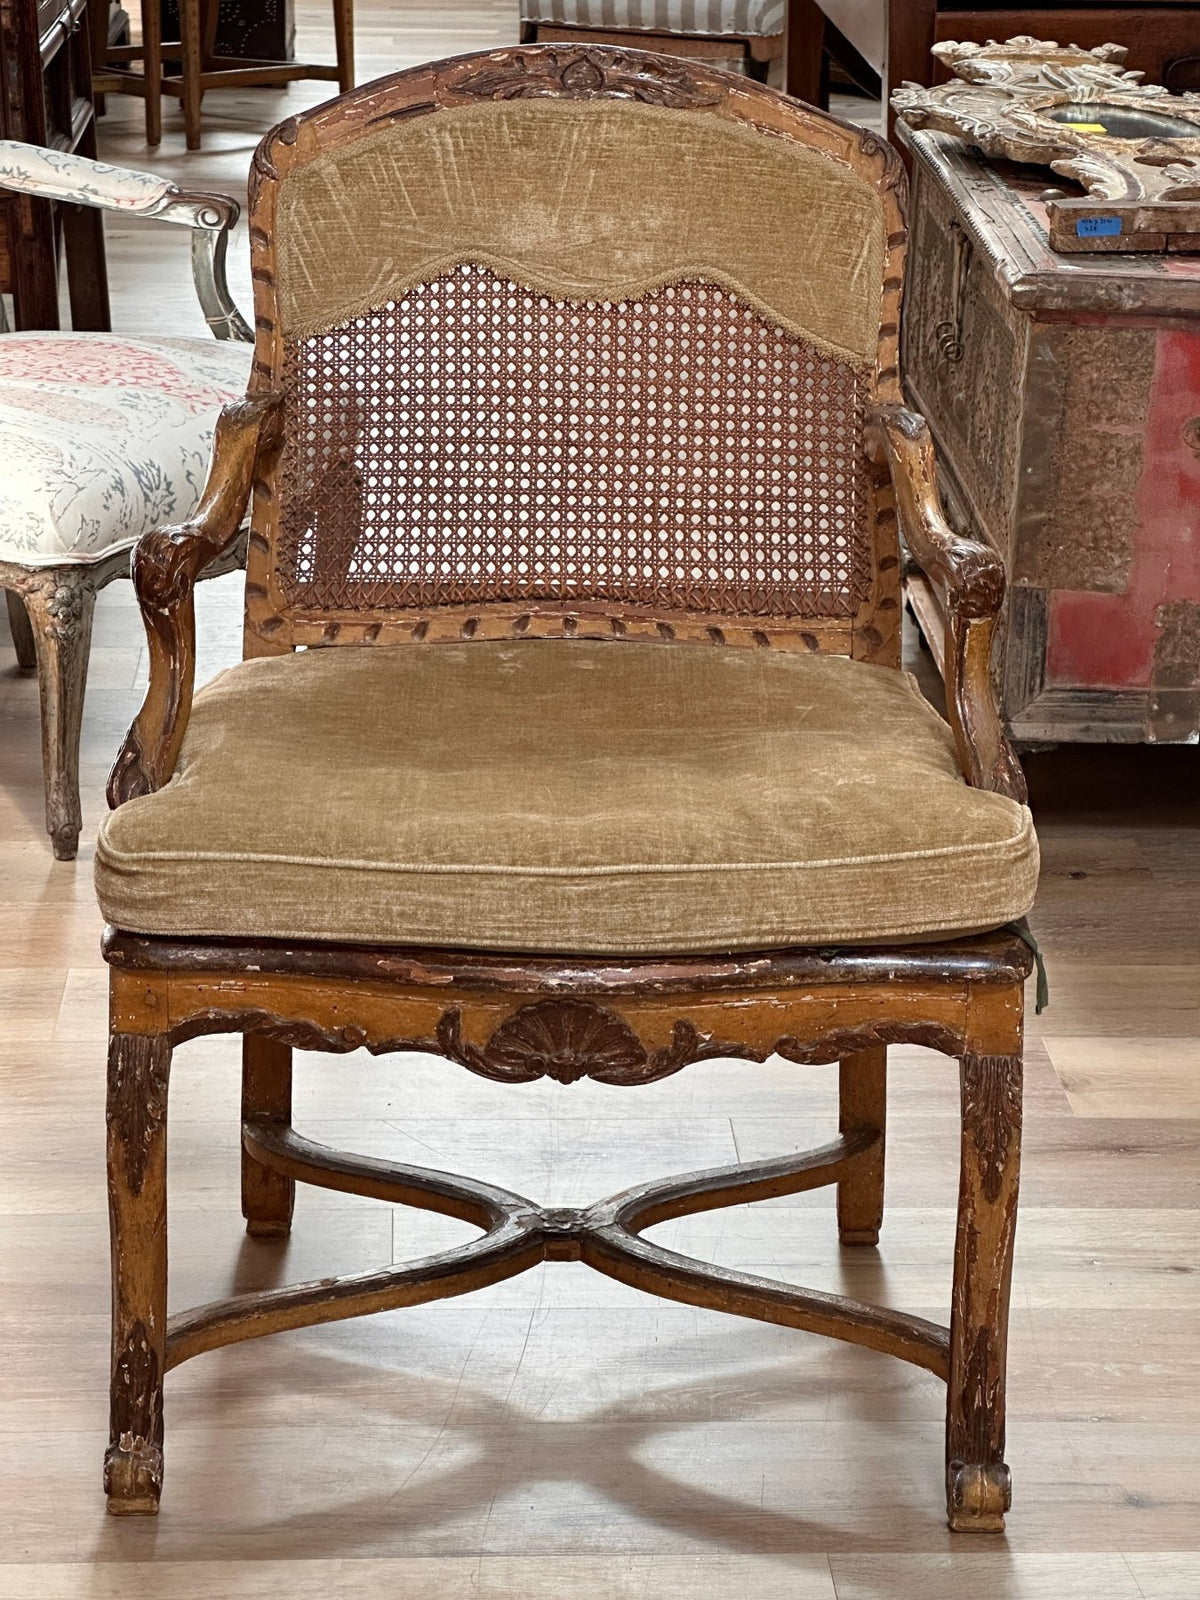 Rare Set of Six 18th Century Venetian Armchairs with original paint - On Hold - Helen Storey Antiques